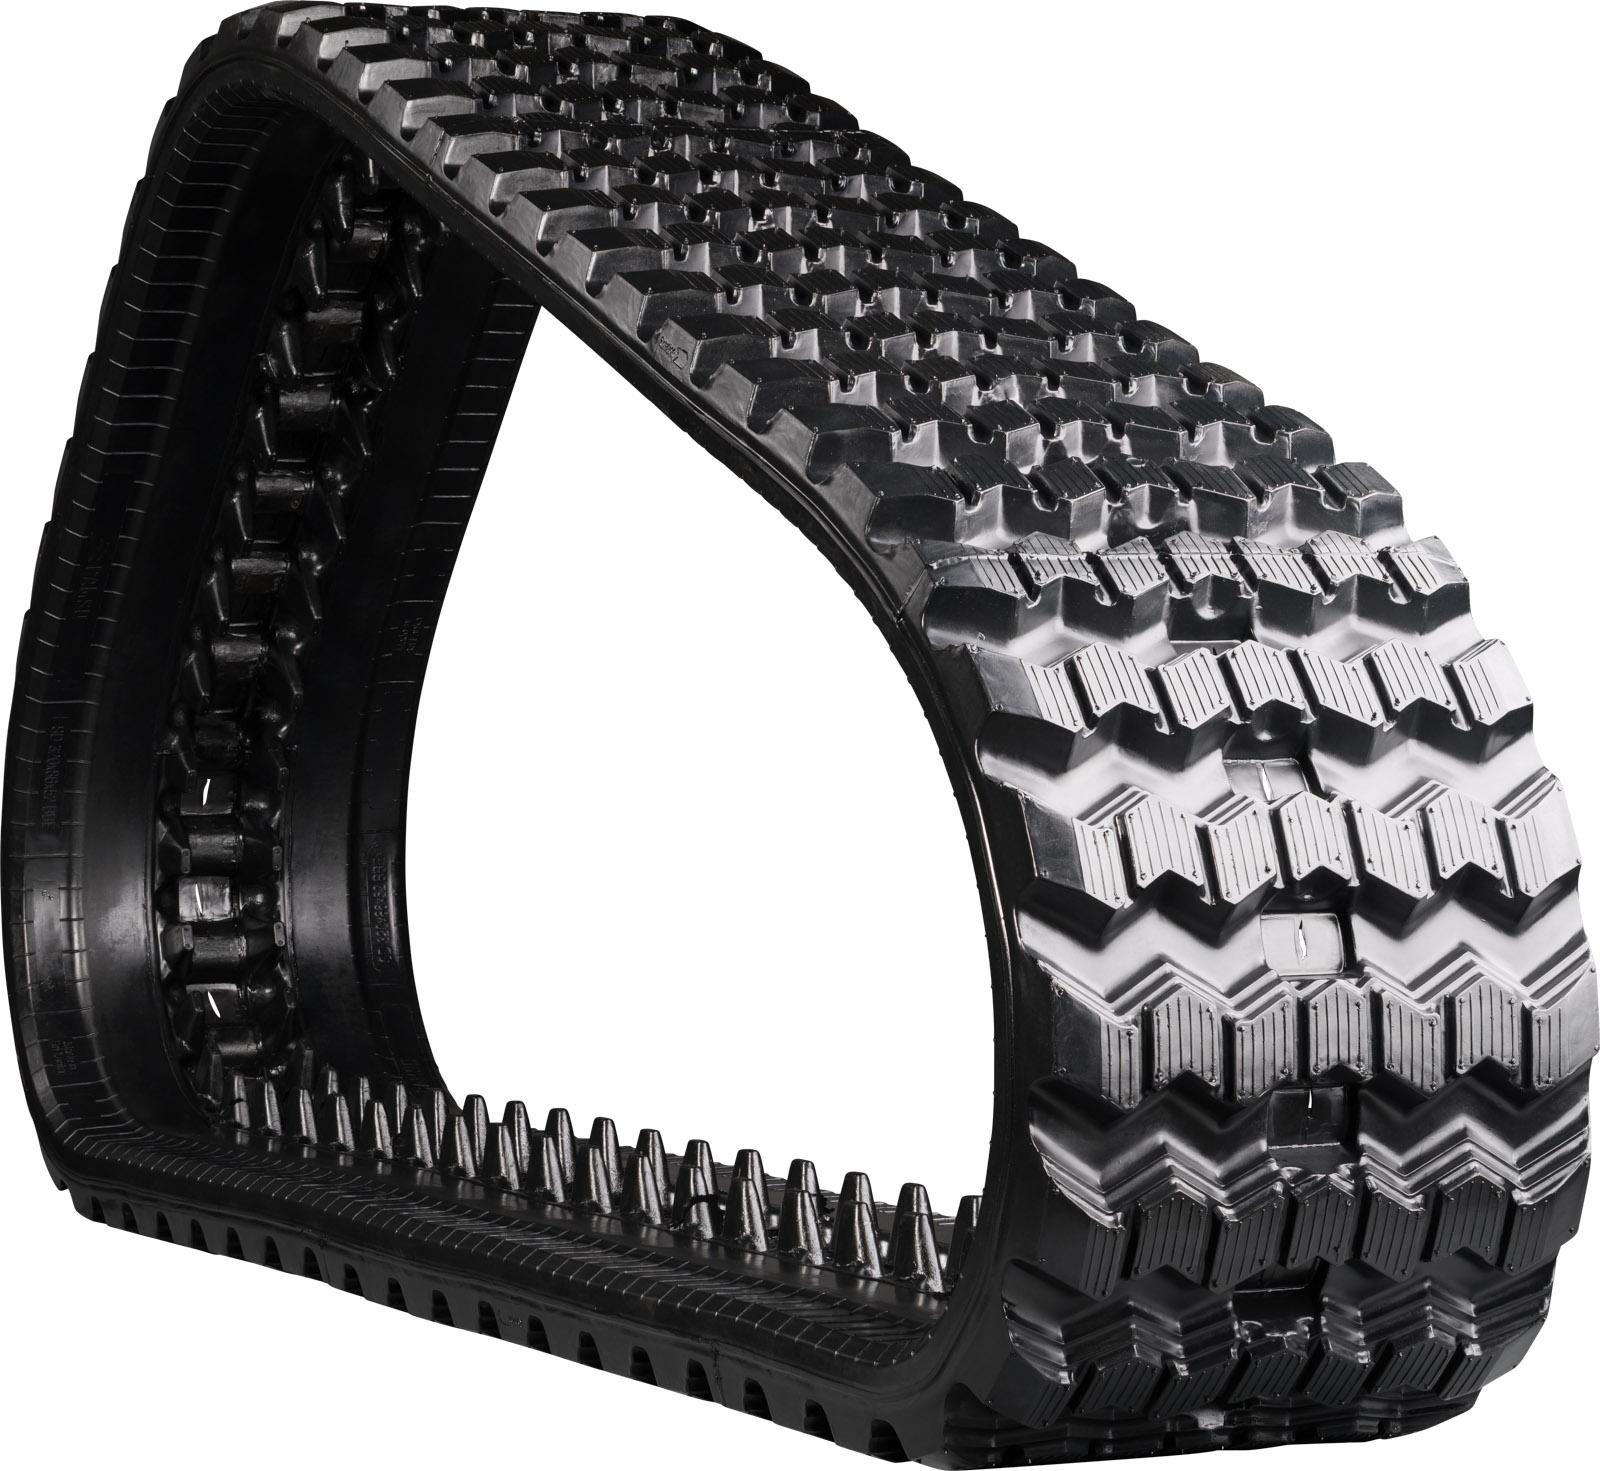 set of 2 13" camso heavy duty sawtooth pattern rubber track (320x86bx52)